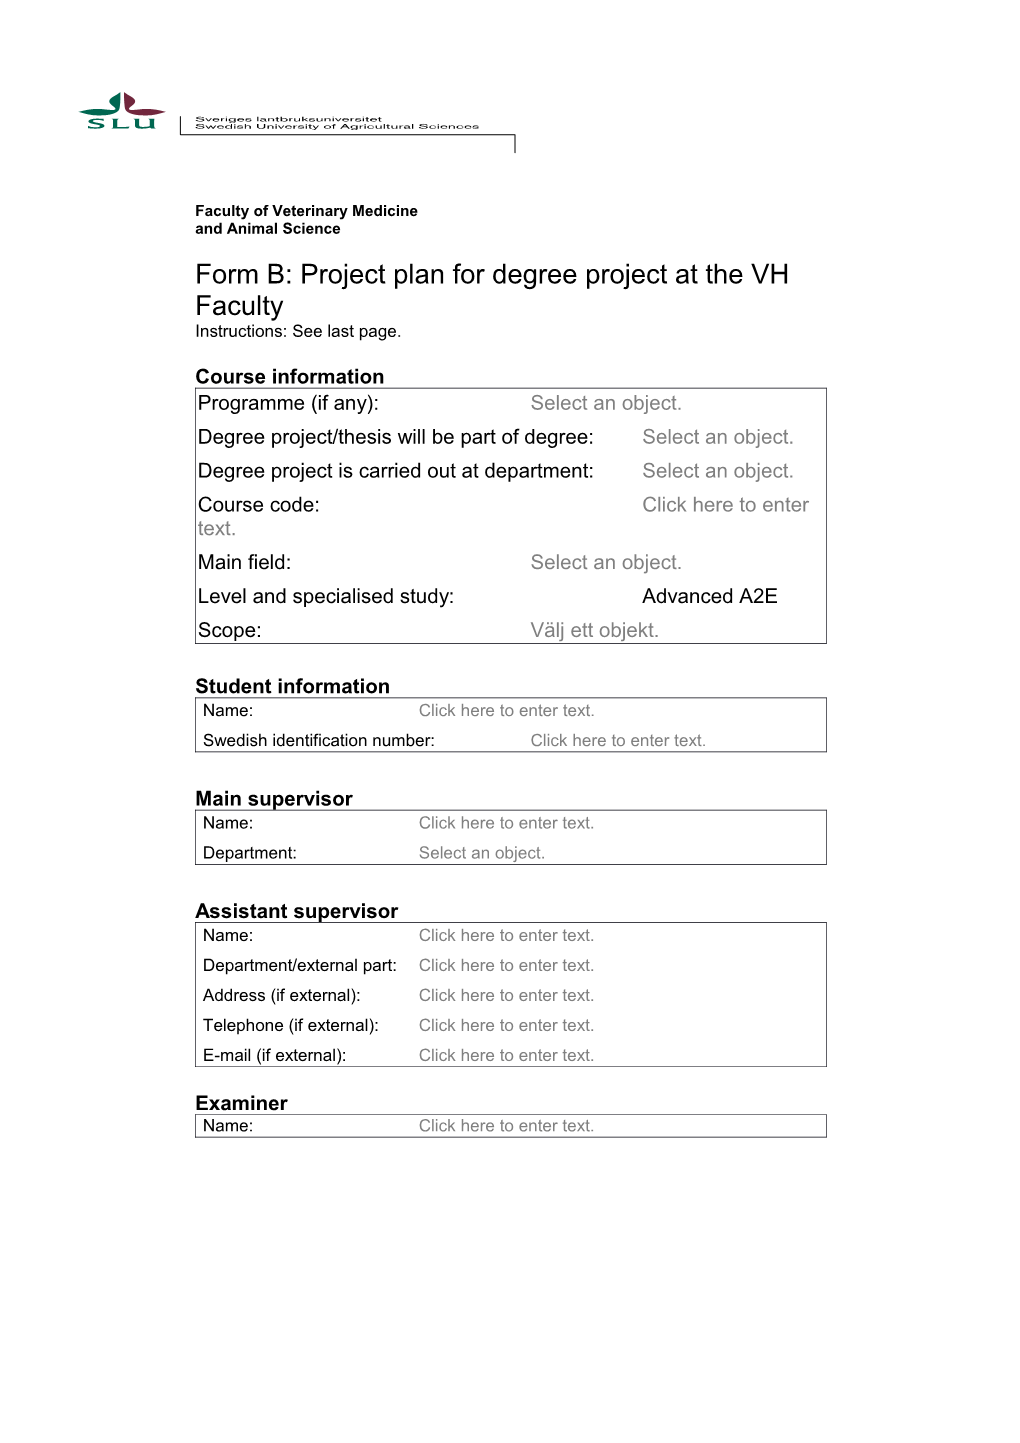 Form B: Project Plan for Degree Project at the VH Faculty